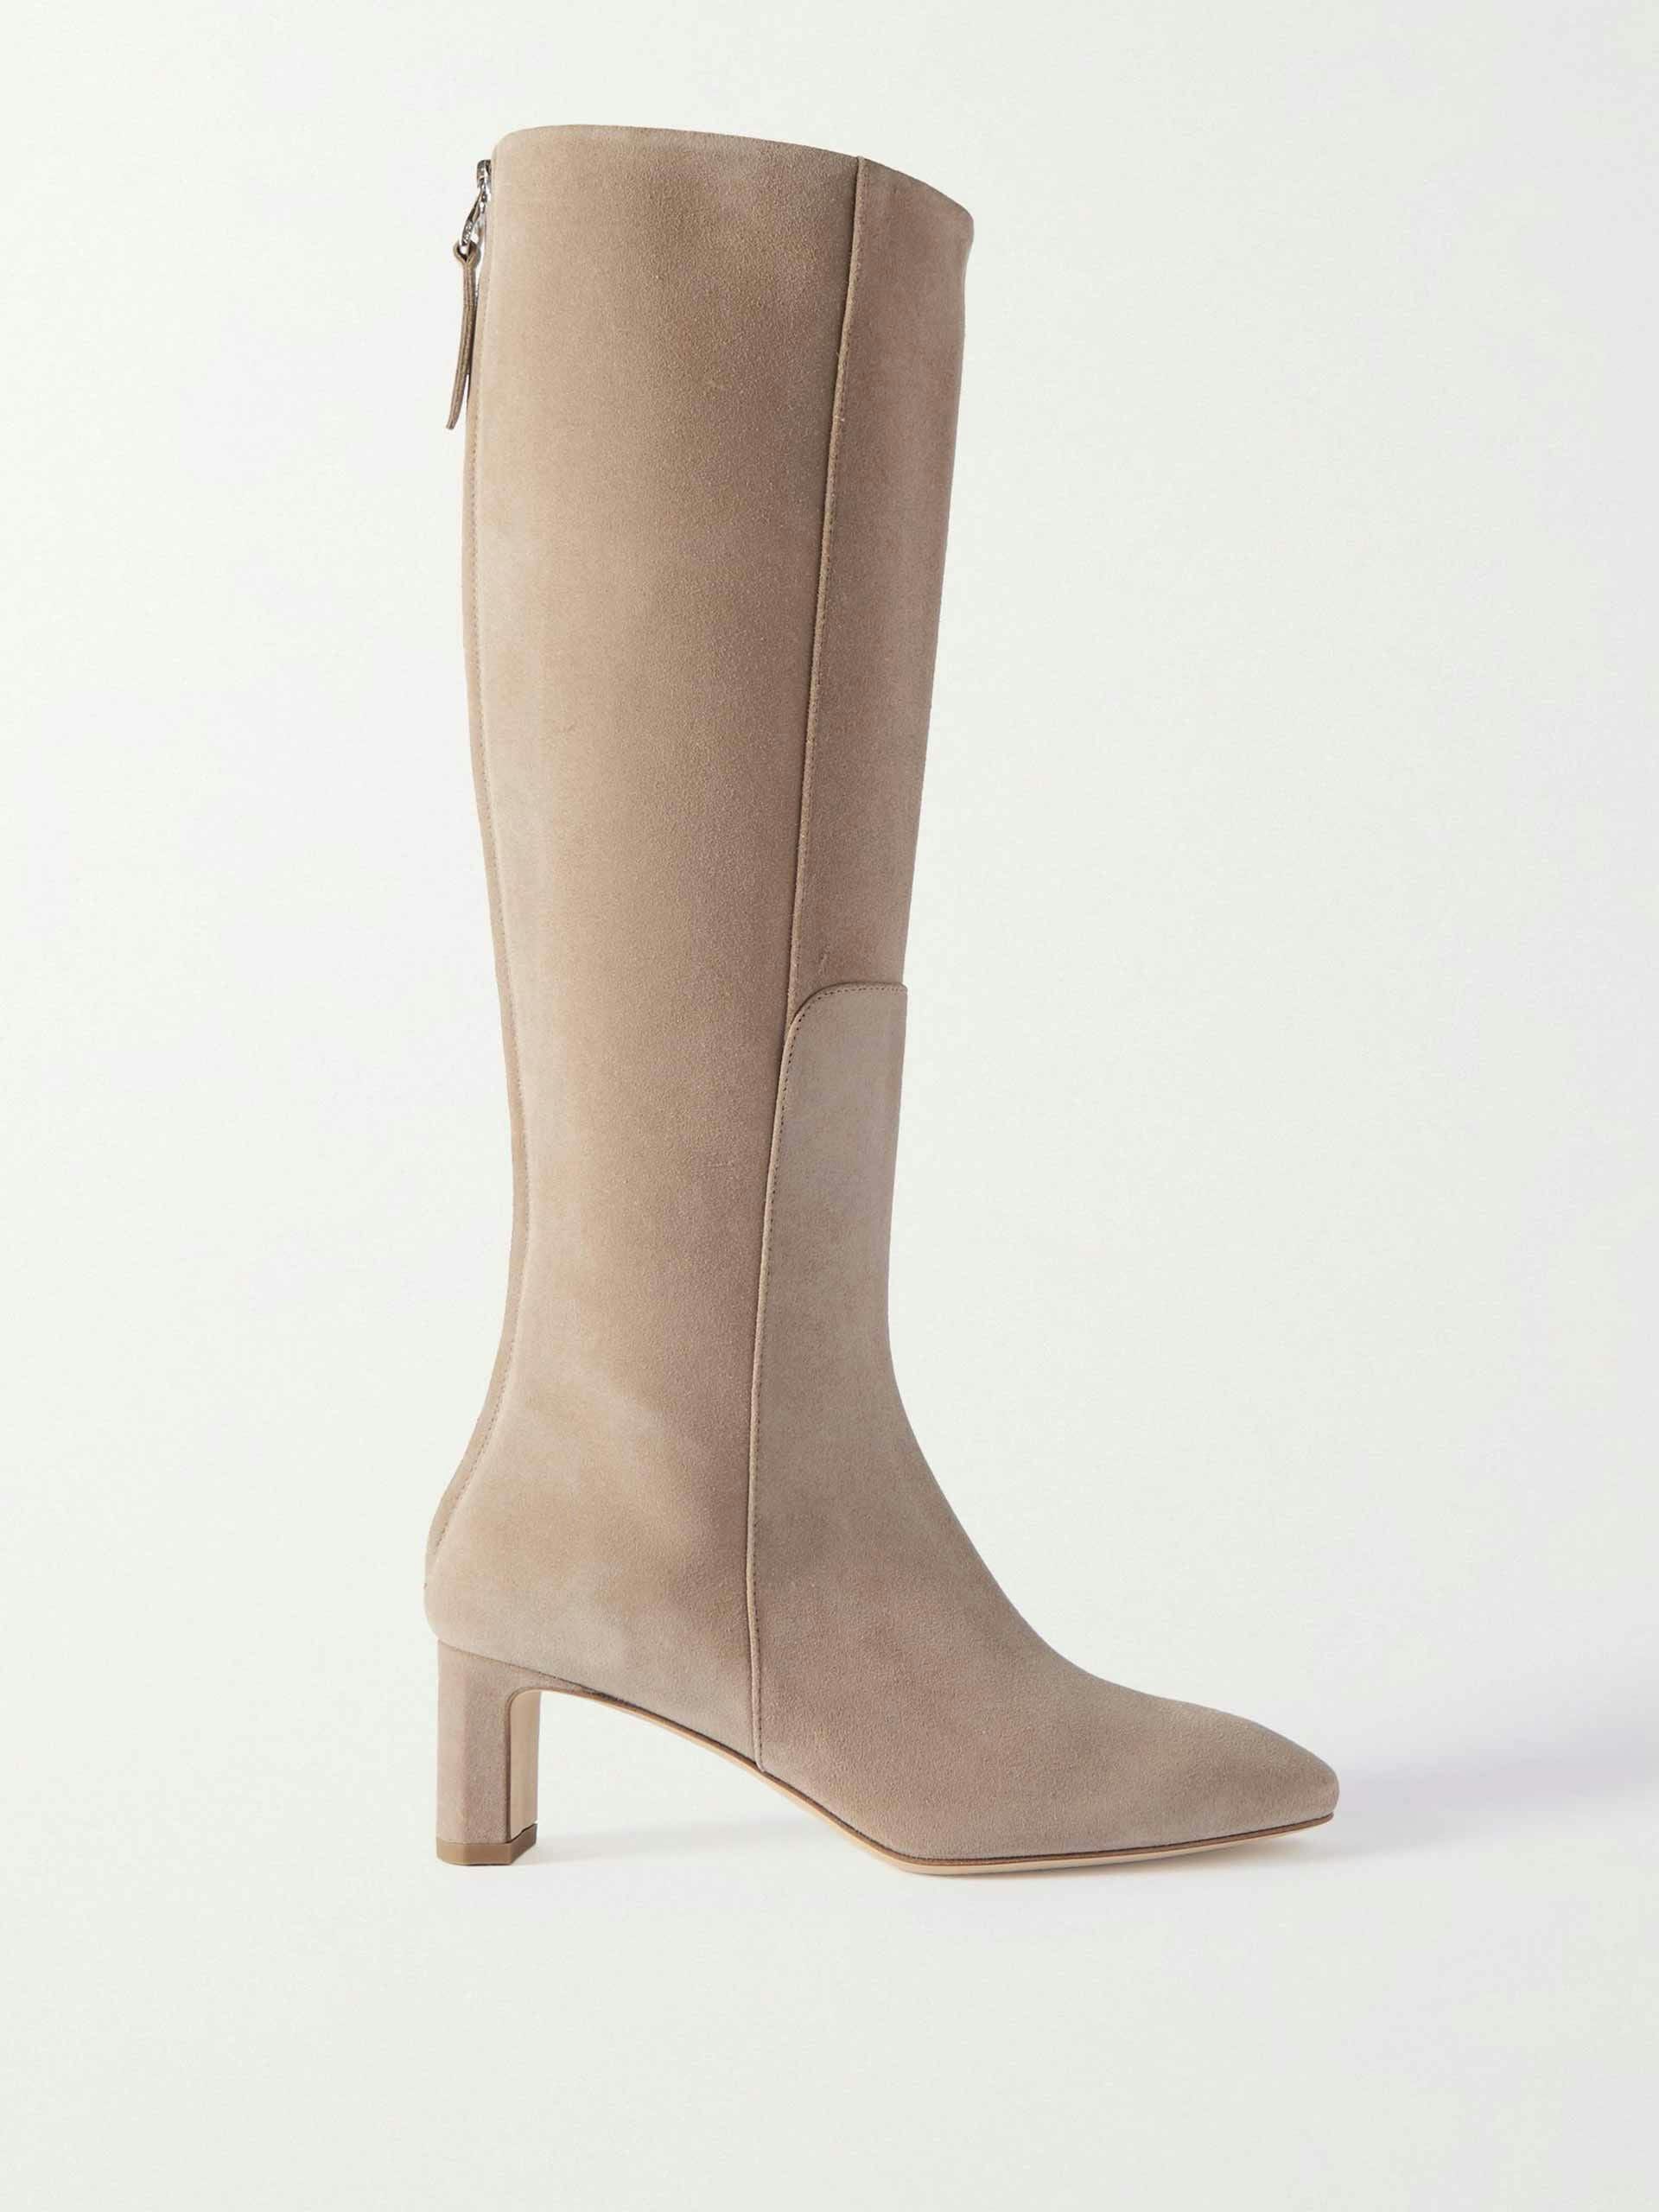 Taylor suede knee high boots